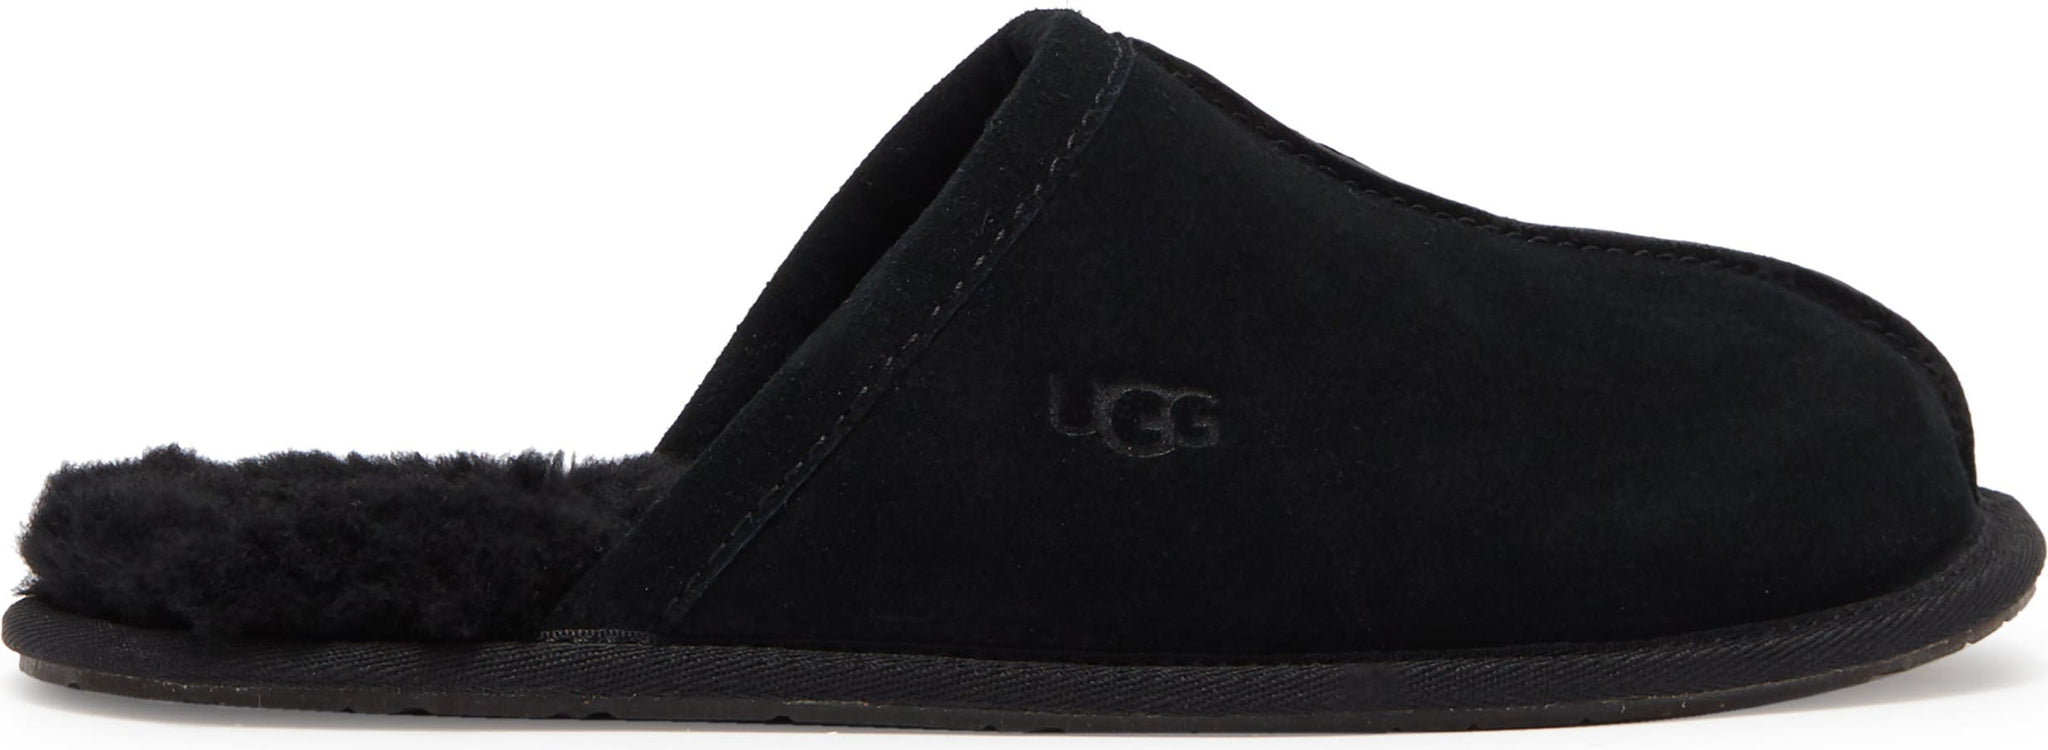 UGG<SUP>®</SUP> Pearle Faux Fur Lined Scuff Slipper, Alternate, color, BLACK